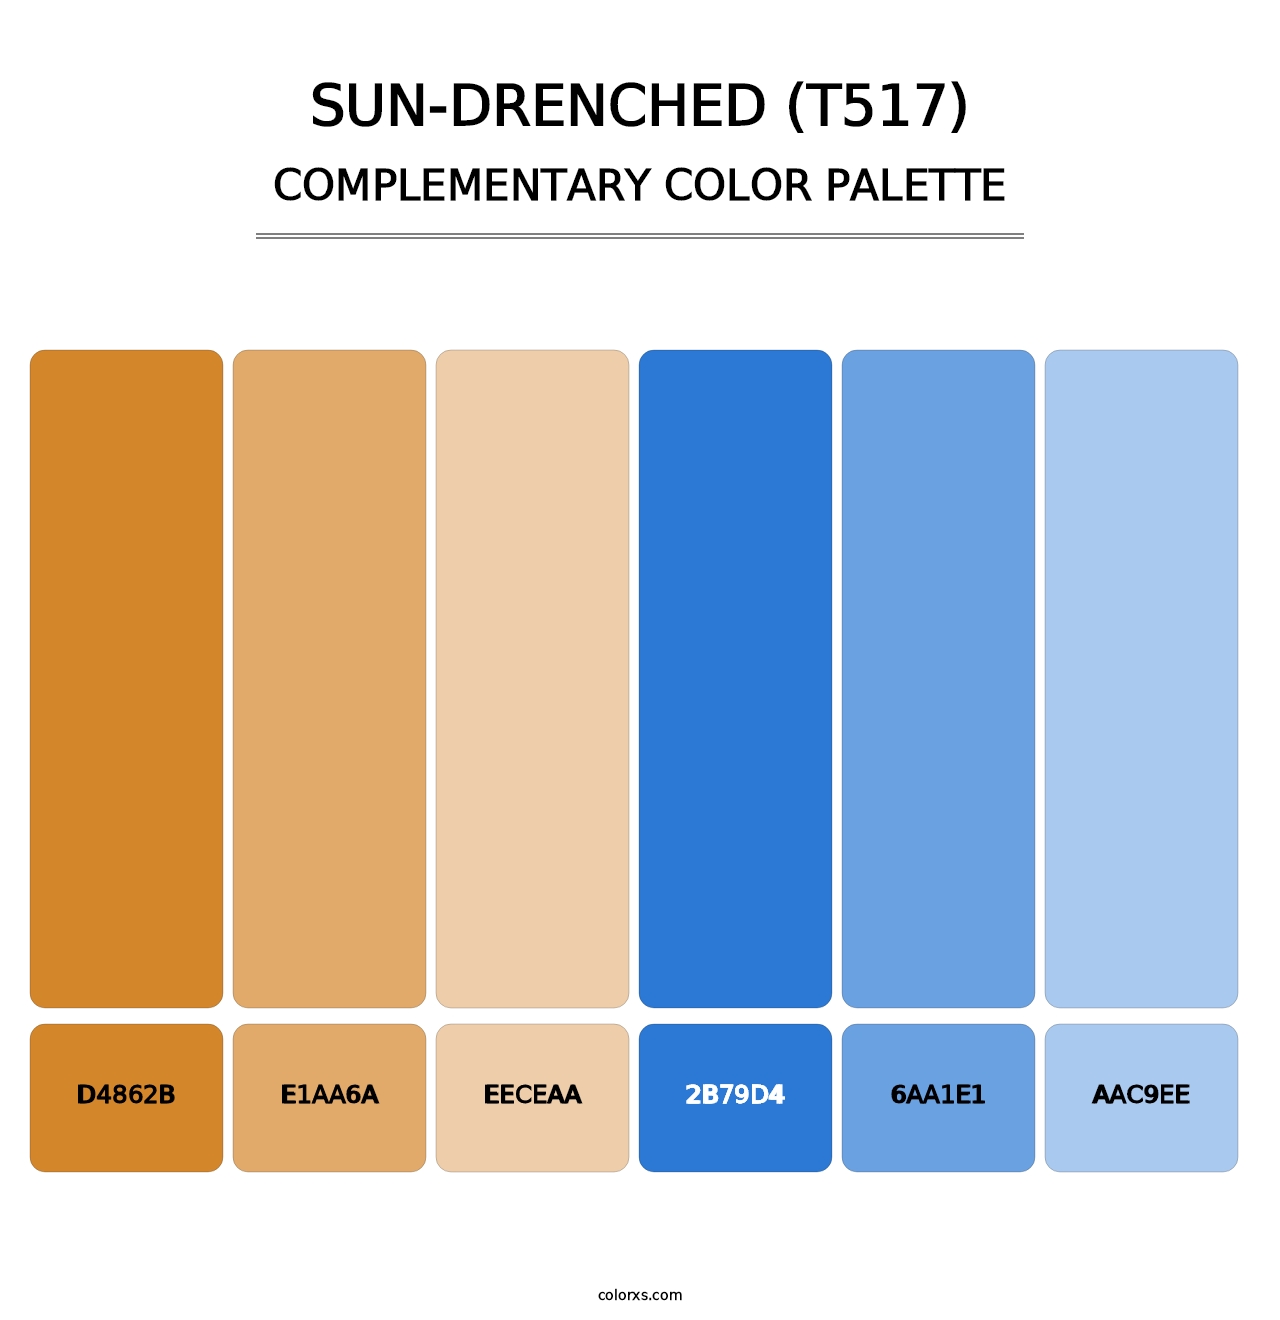 Sun-Drenched (T517) - Complementary Color Palette